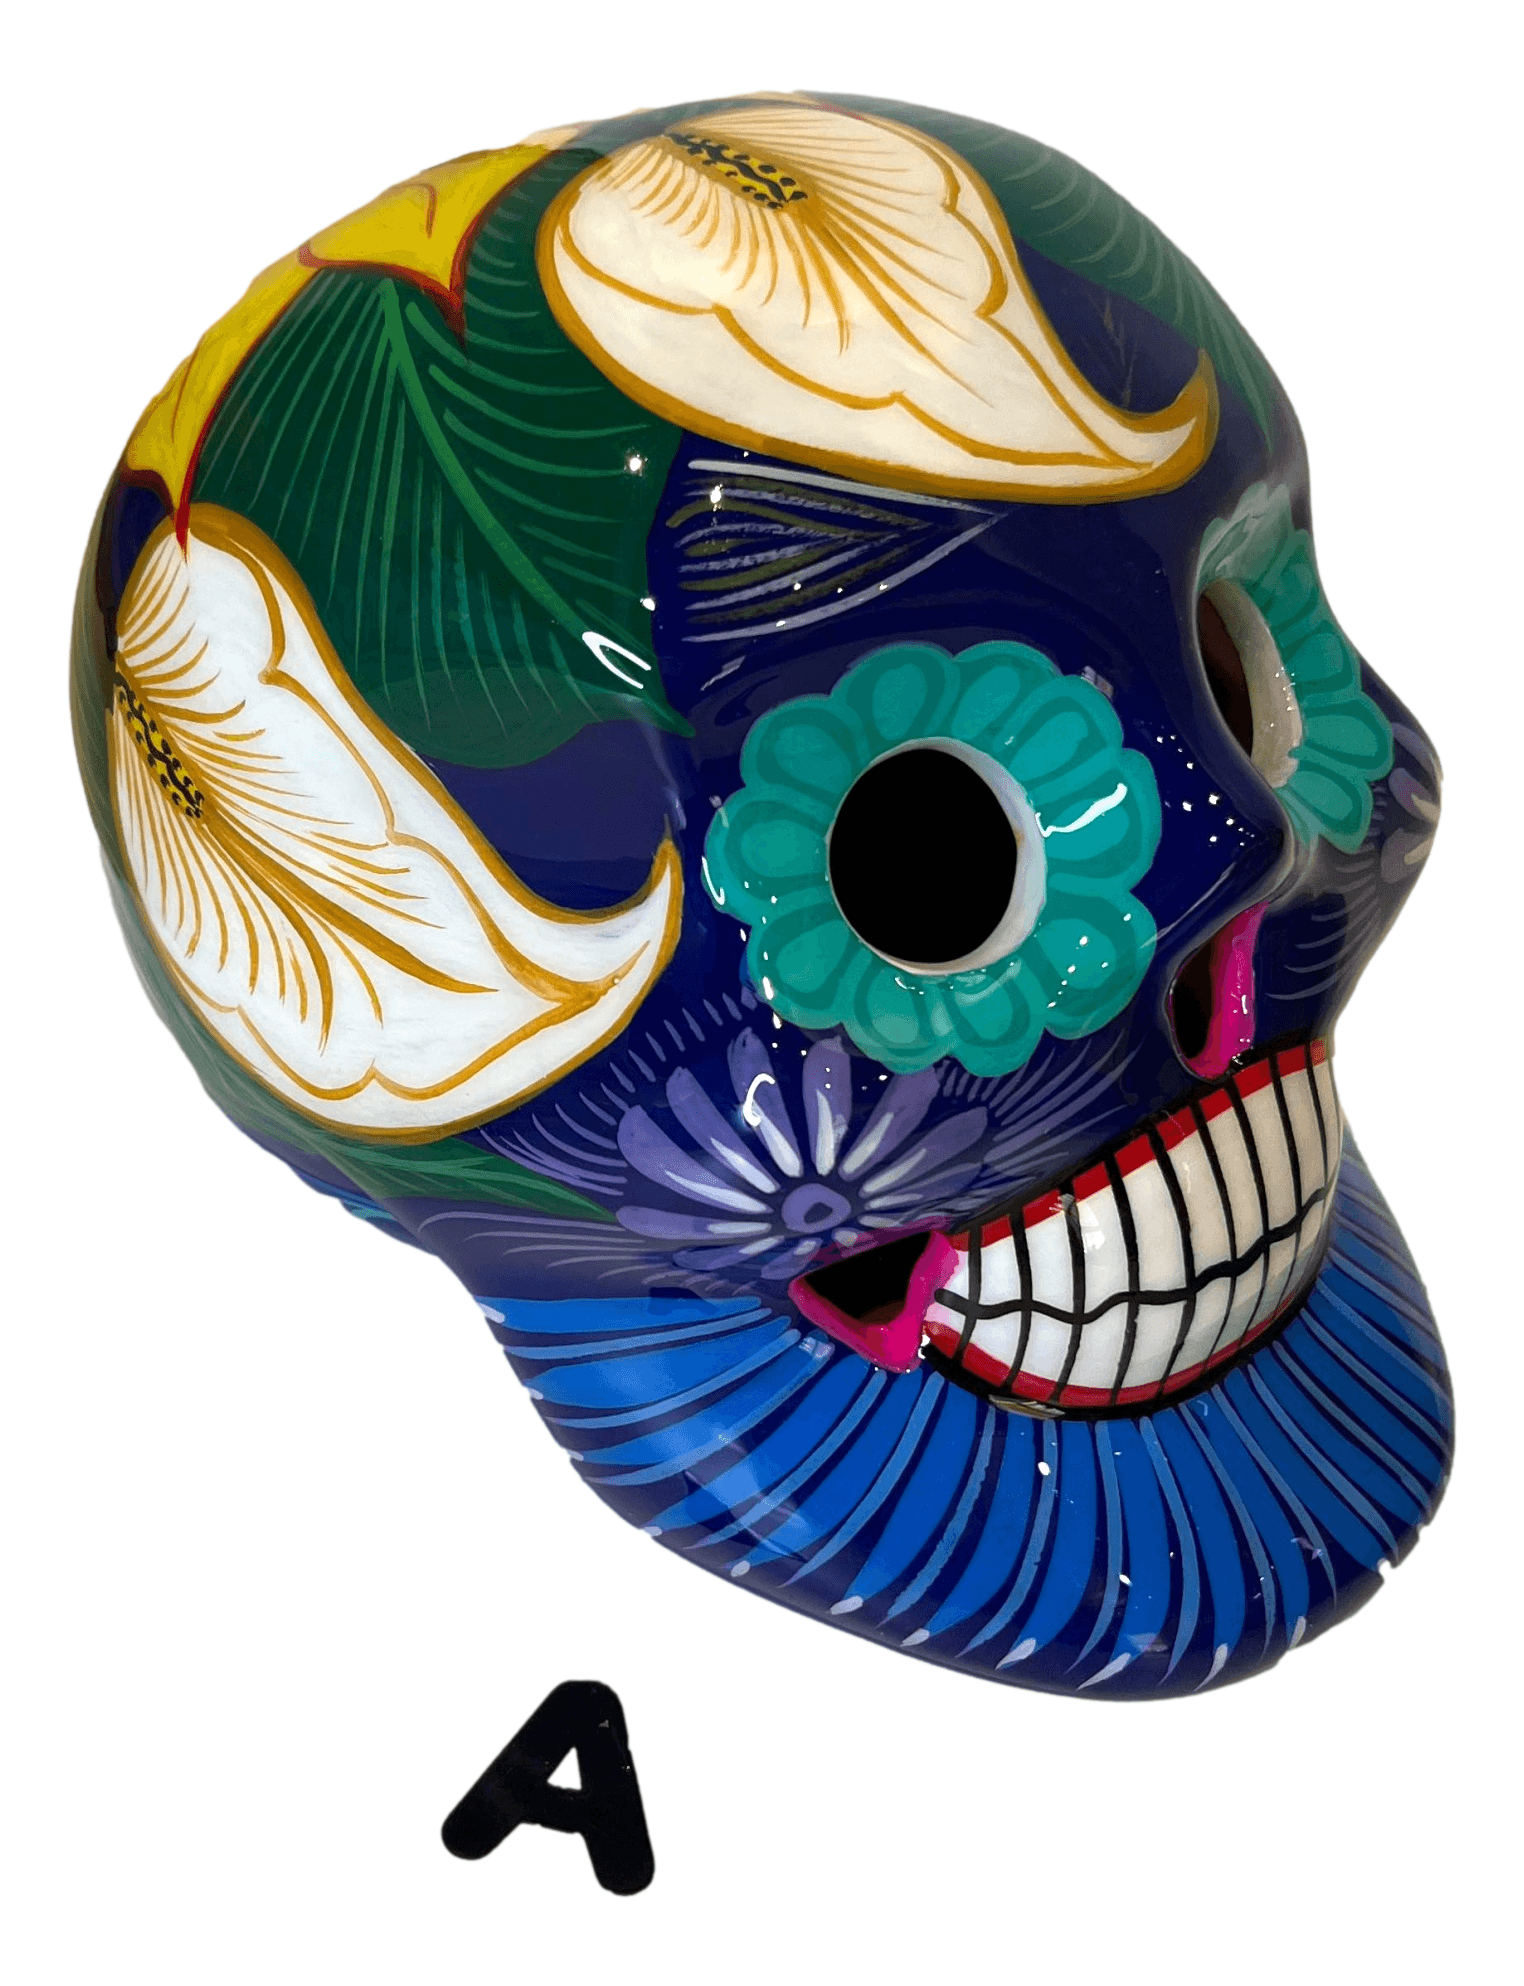 Skull Ceramic Glazed Large Handcrafted By Skilled Mexican Artisans L: 6.5 inches X W: 3.5 inches X H: 6 inches - Ysleta Mission Gift Shop- VOTED El Paso's Best Gift Shop